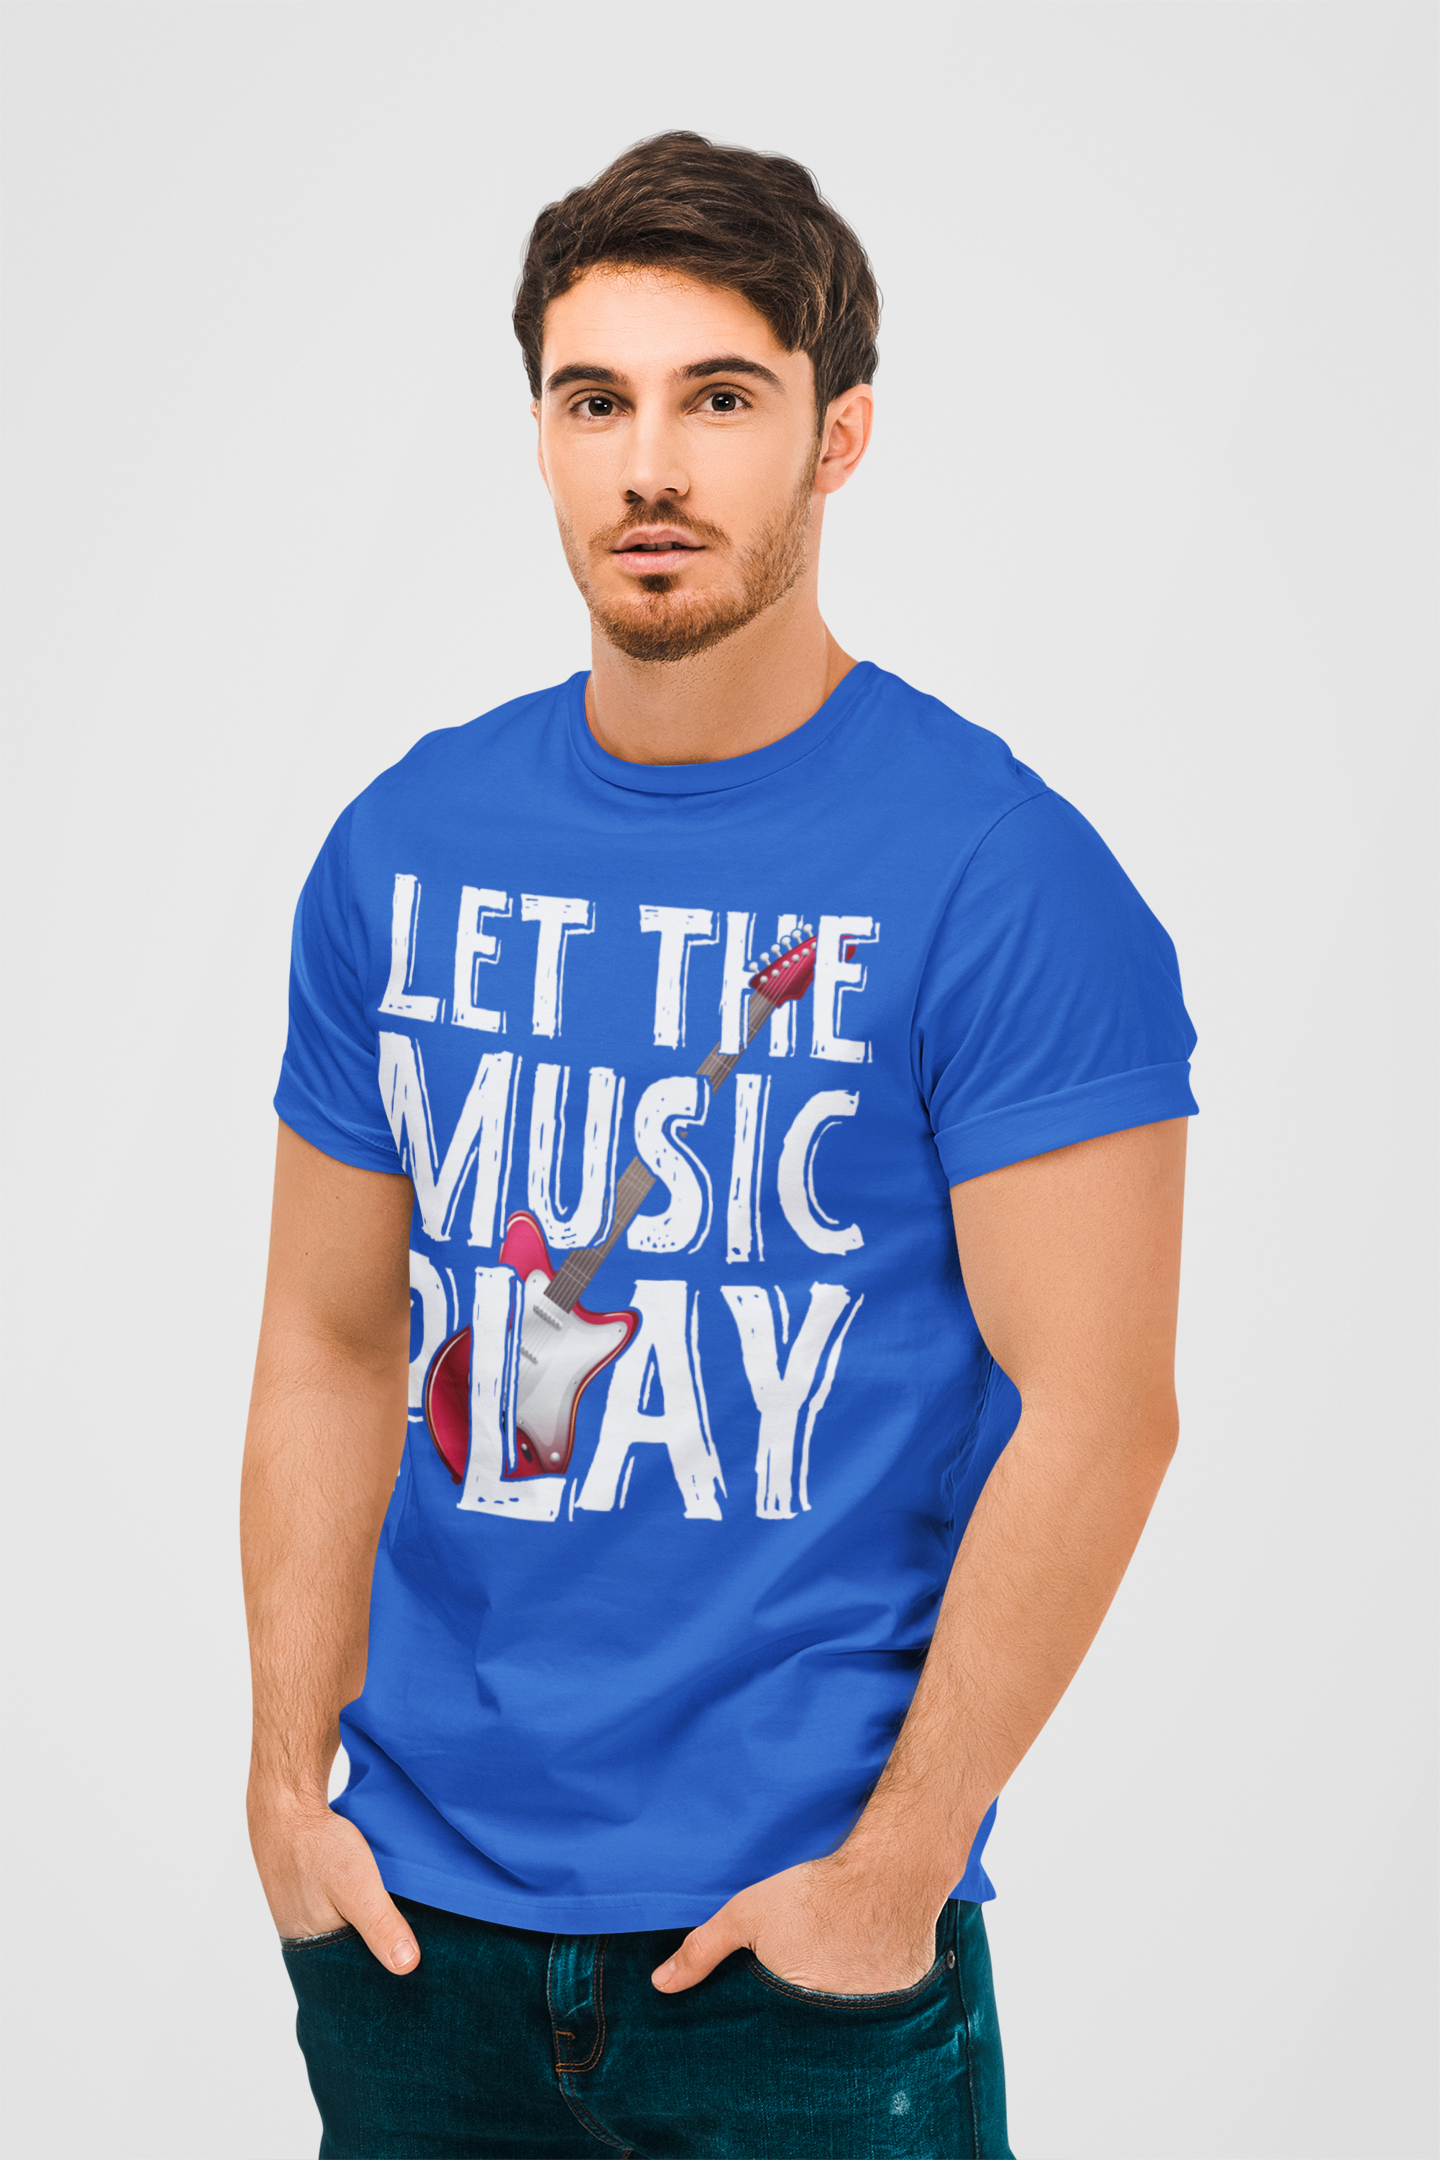 Let The Music Play Royal Blue Round Neck T-Shirt for Men